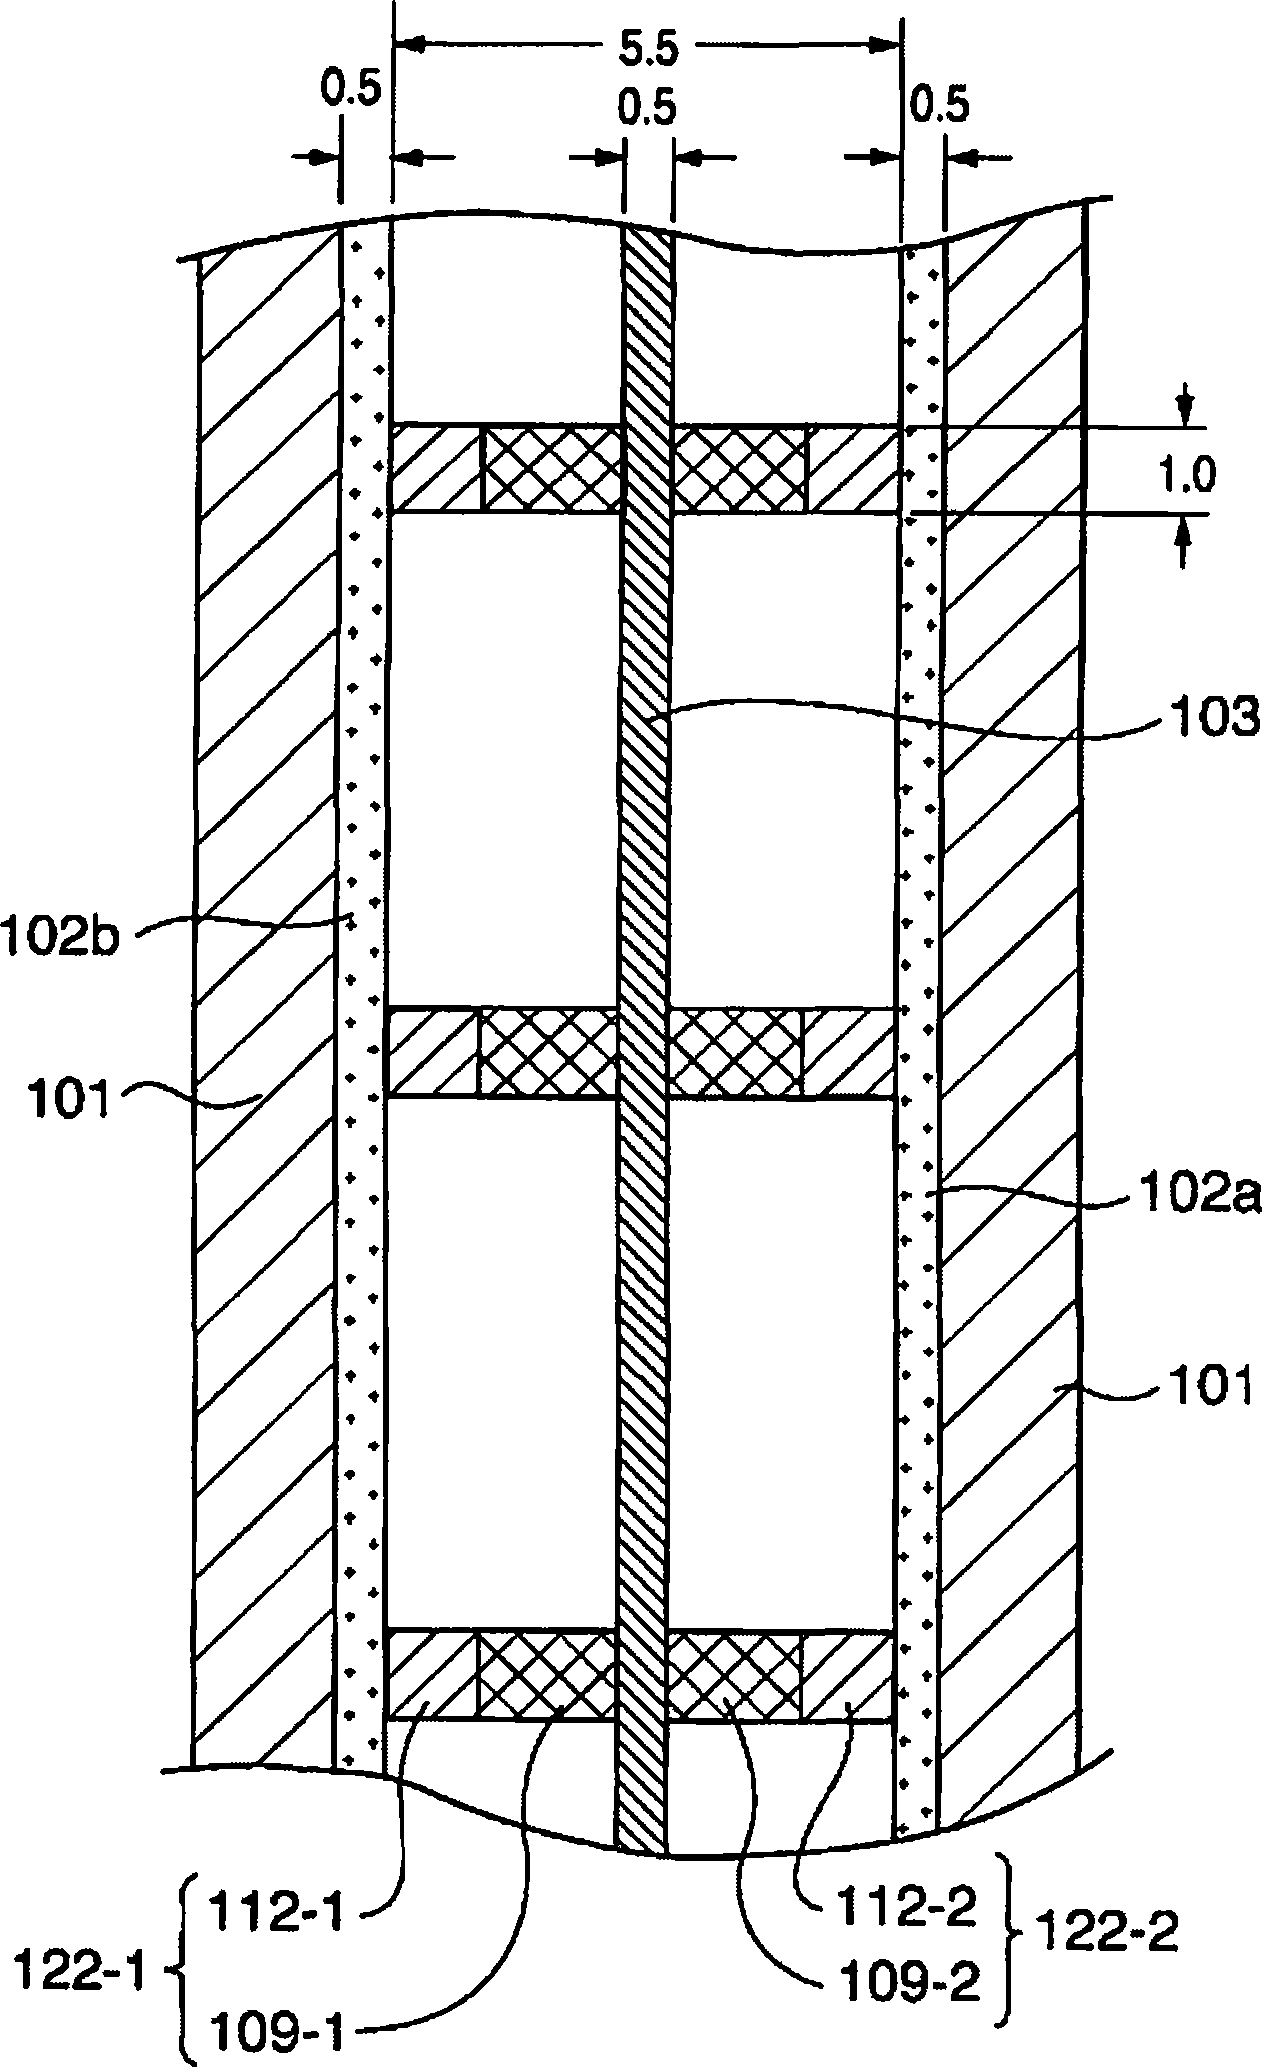 Electrolyzed water generator and electrode set with membrane used in the electrolyzed water generator